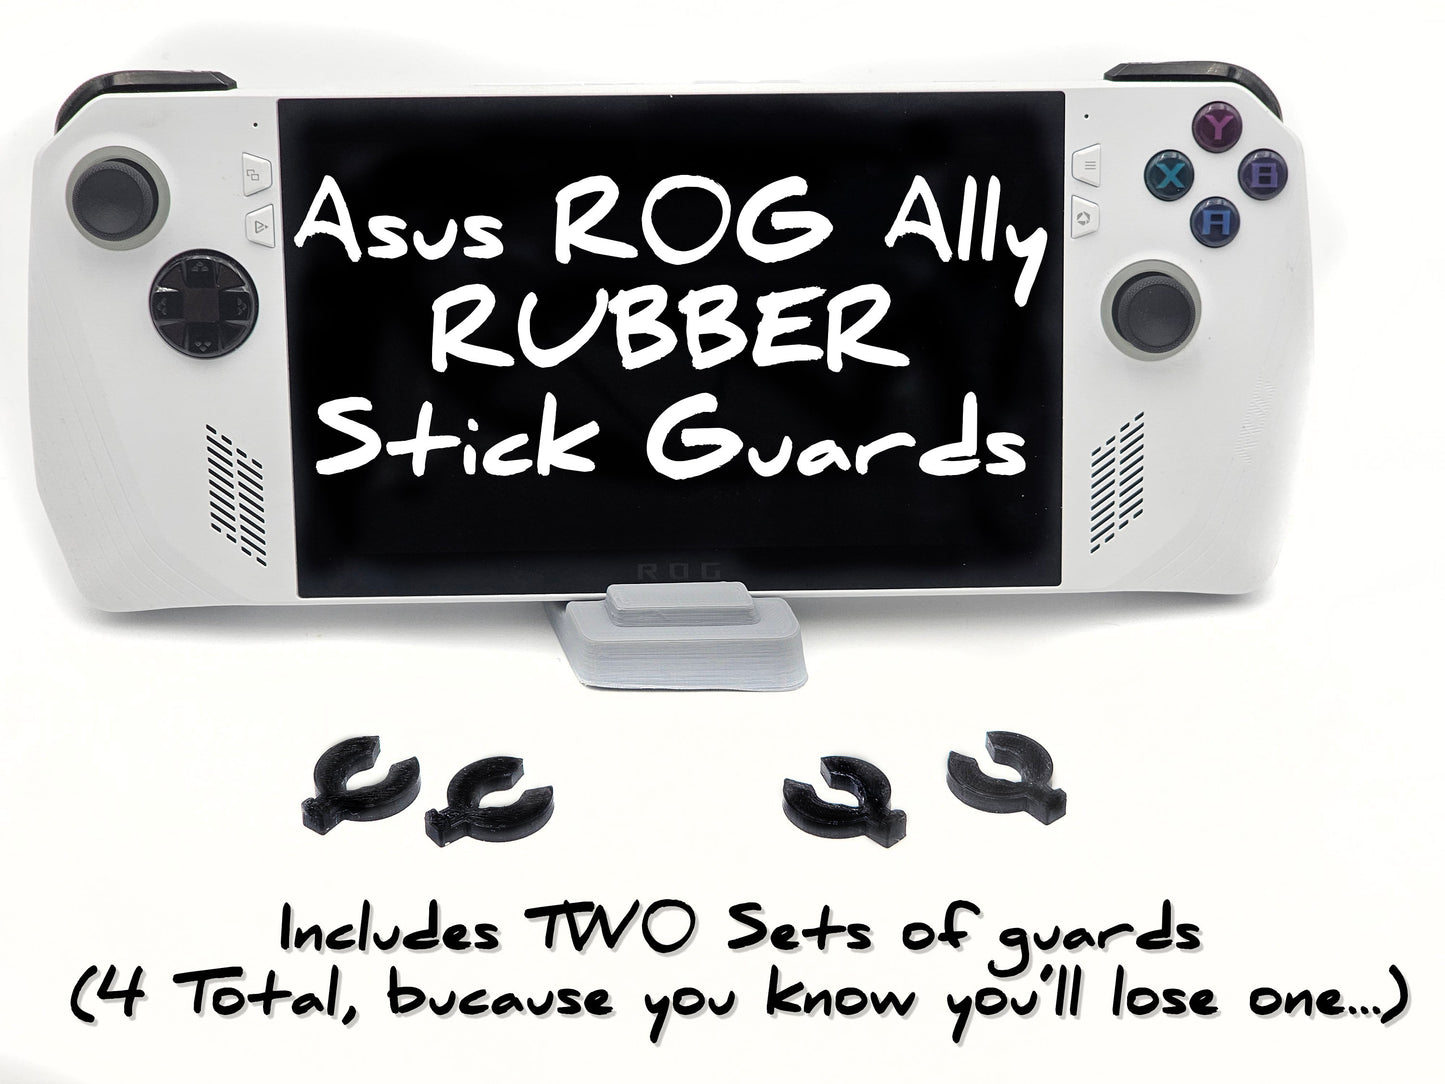 Asus Rog Ally Joystick Guards - Rubber Stick Guards, No Scratch and Protects Your Sticks